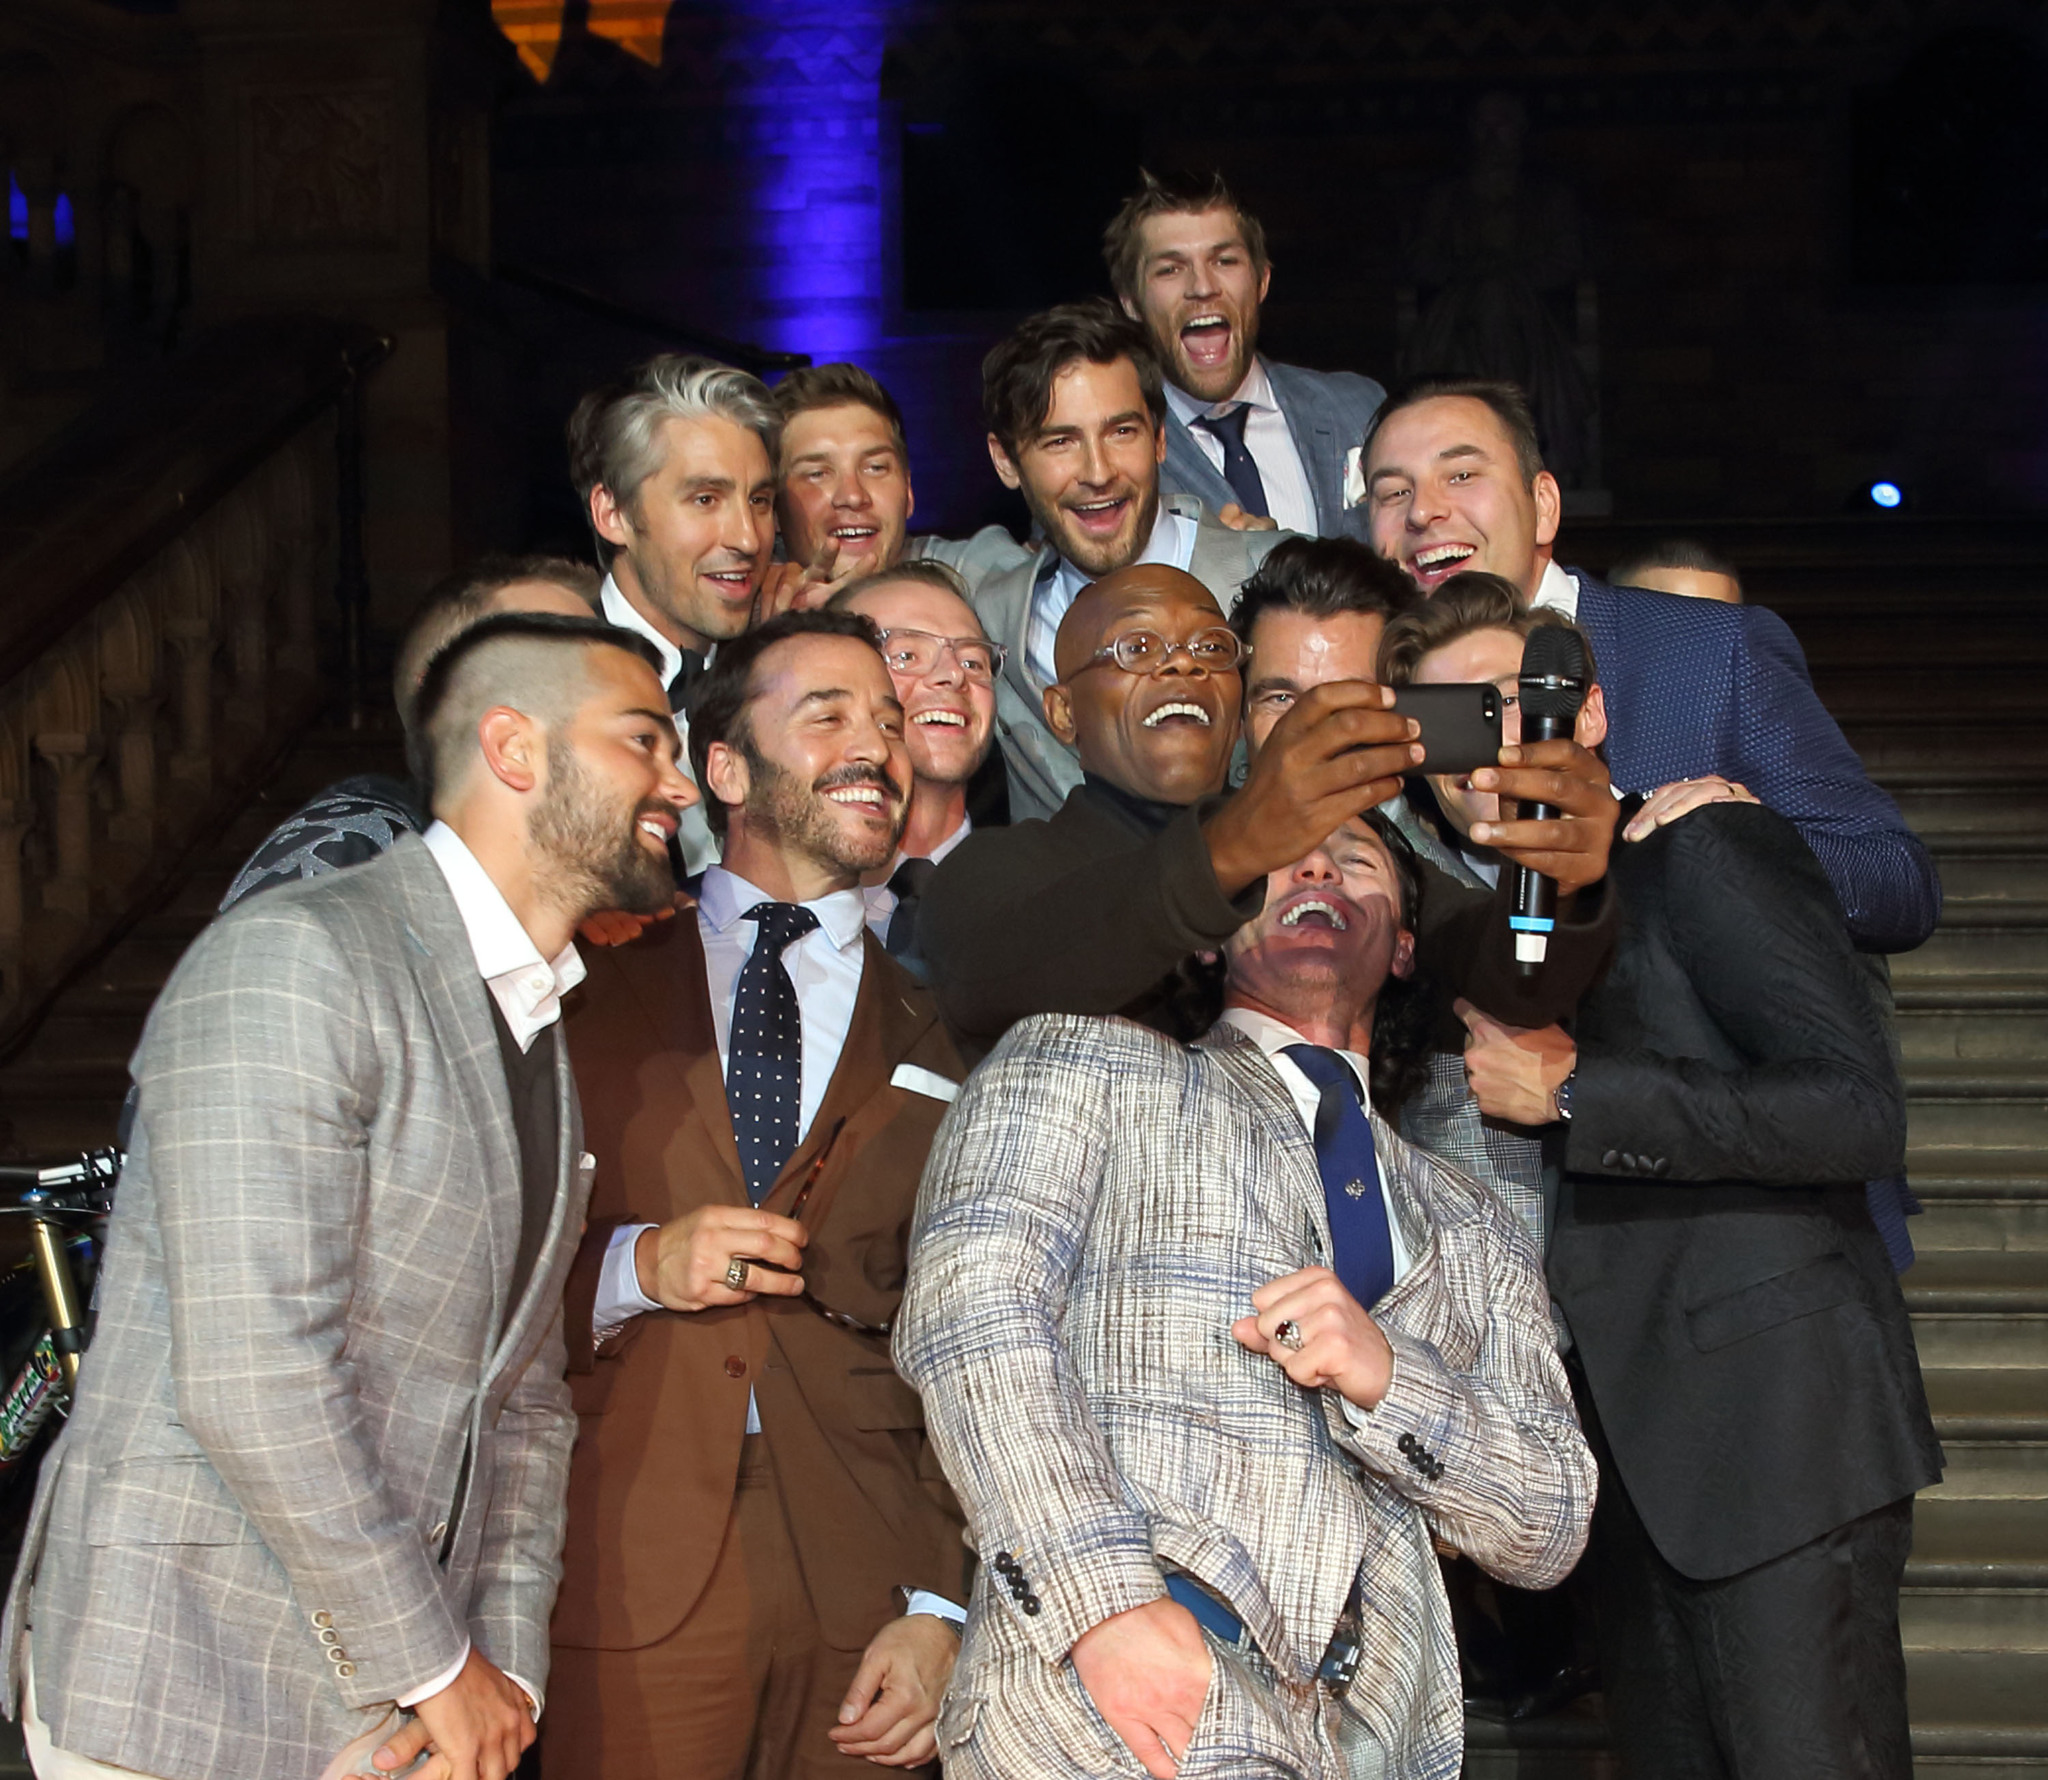 Jahmene Douglas, Samuel L Jackson, Simon Pegg, Jeremy Piven, Bear Grylls, George Lamb, Robert Konijc, Antony Mackie, David Gandy, David Walliams, Luke Evans, Jesse Metcalfe andOliver Cheshire attend One For The Boys Fashion Ball, hosted by Samuel L Jackson which is uniting men against cancer as part of London Collections: Men at Natural History Museum on June 15, 2014 in London, England.